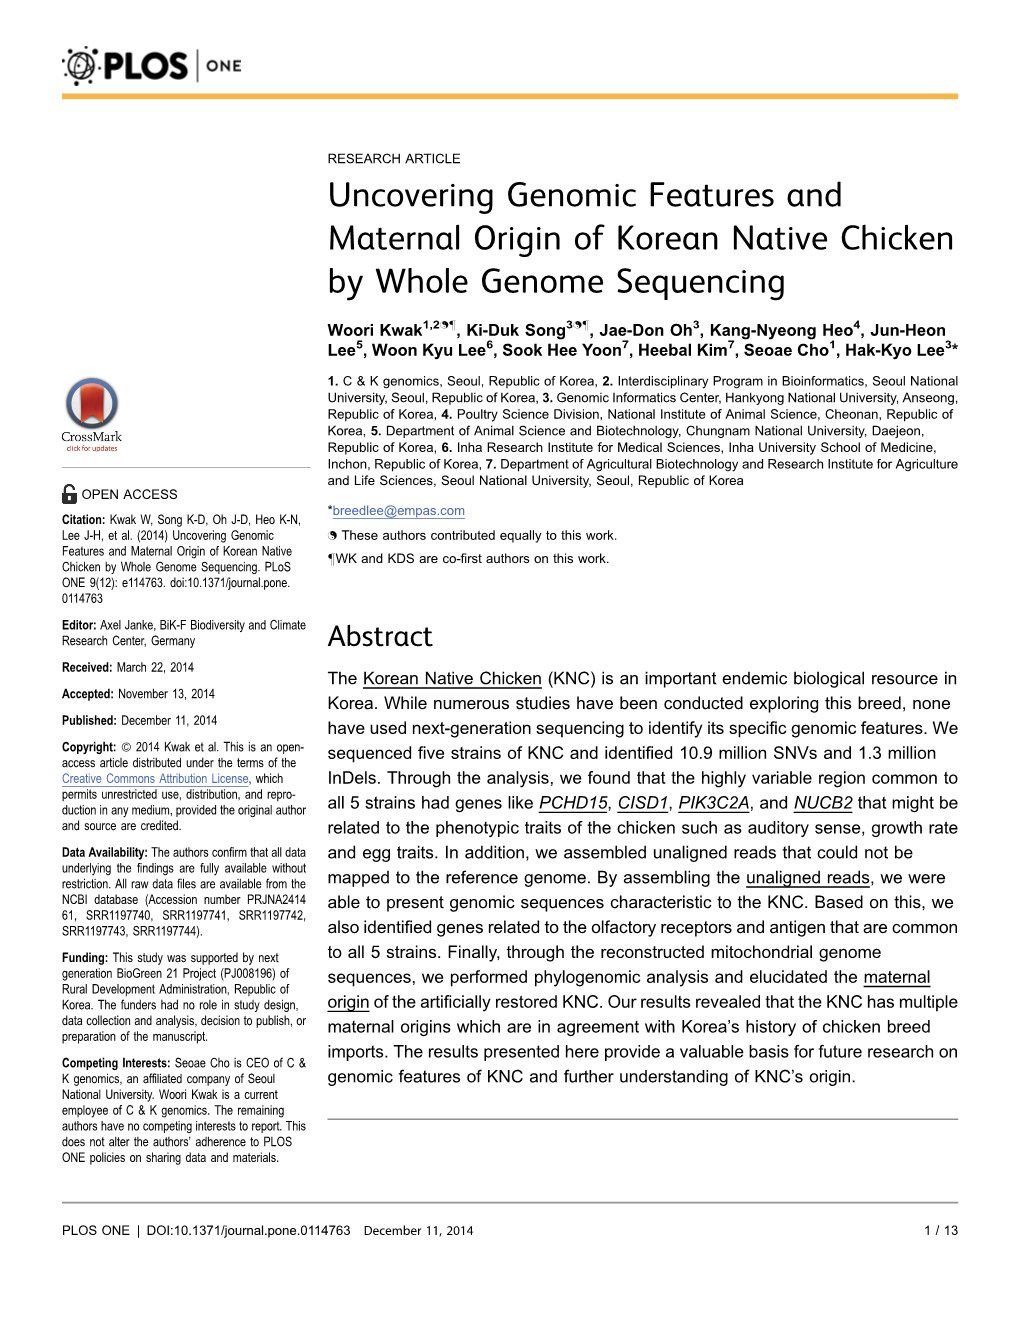 Uncovering Genomic Features and Maternal Origin of Korean Native Chicken by Whole Genome Sequencing